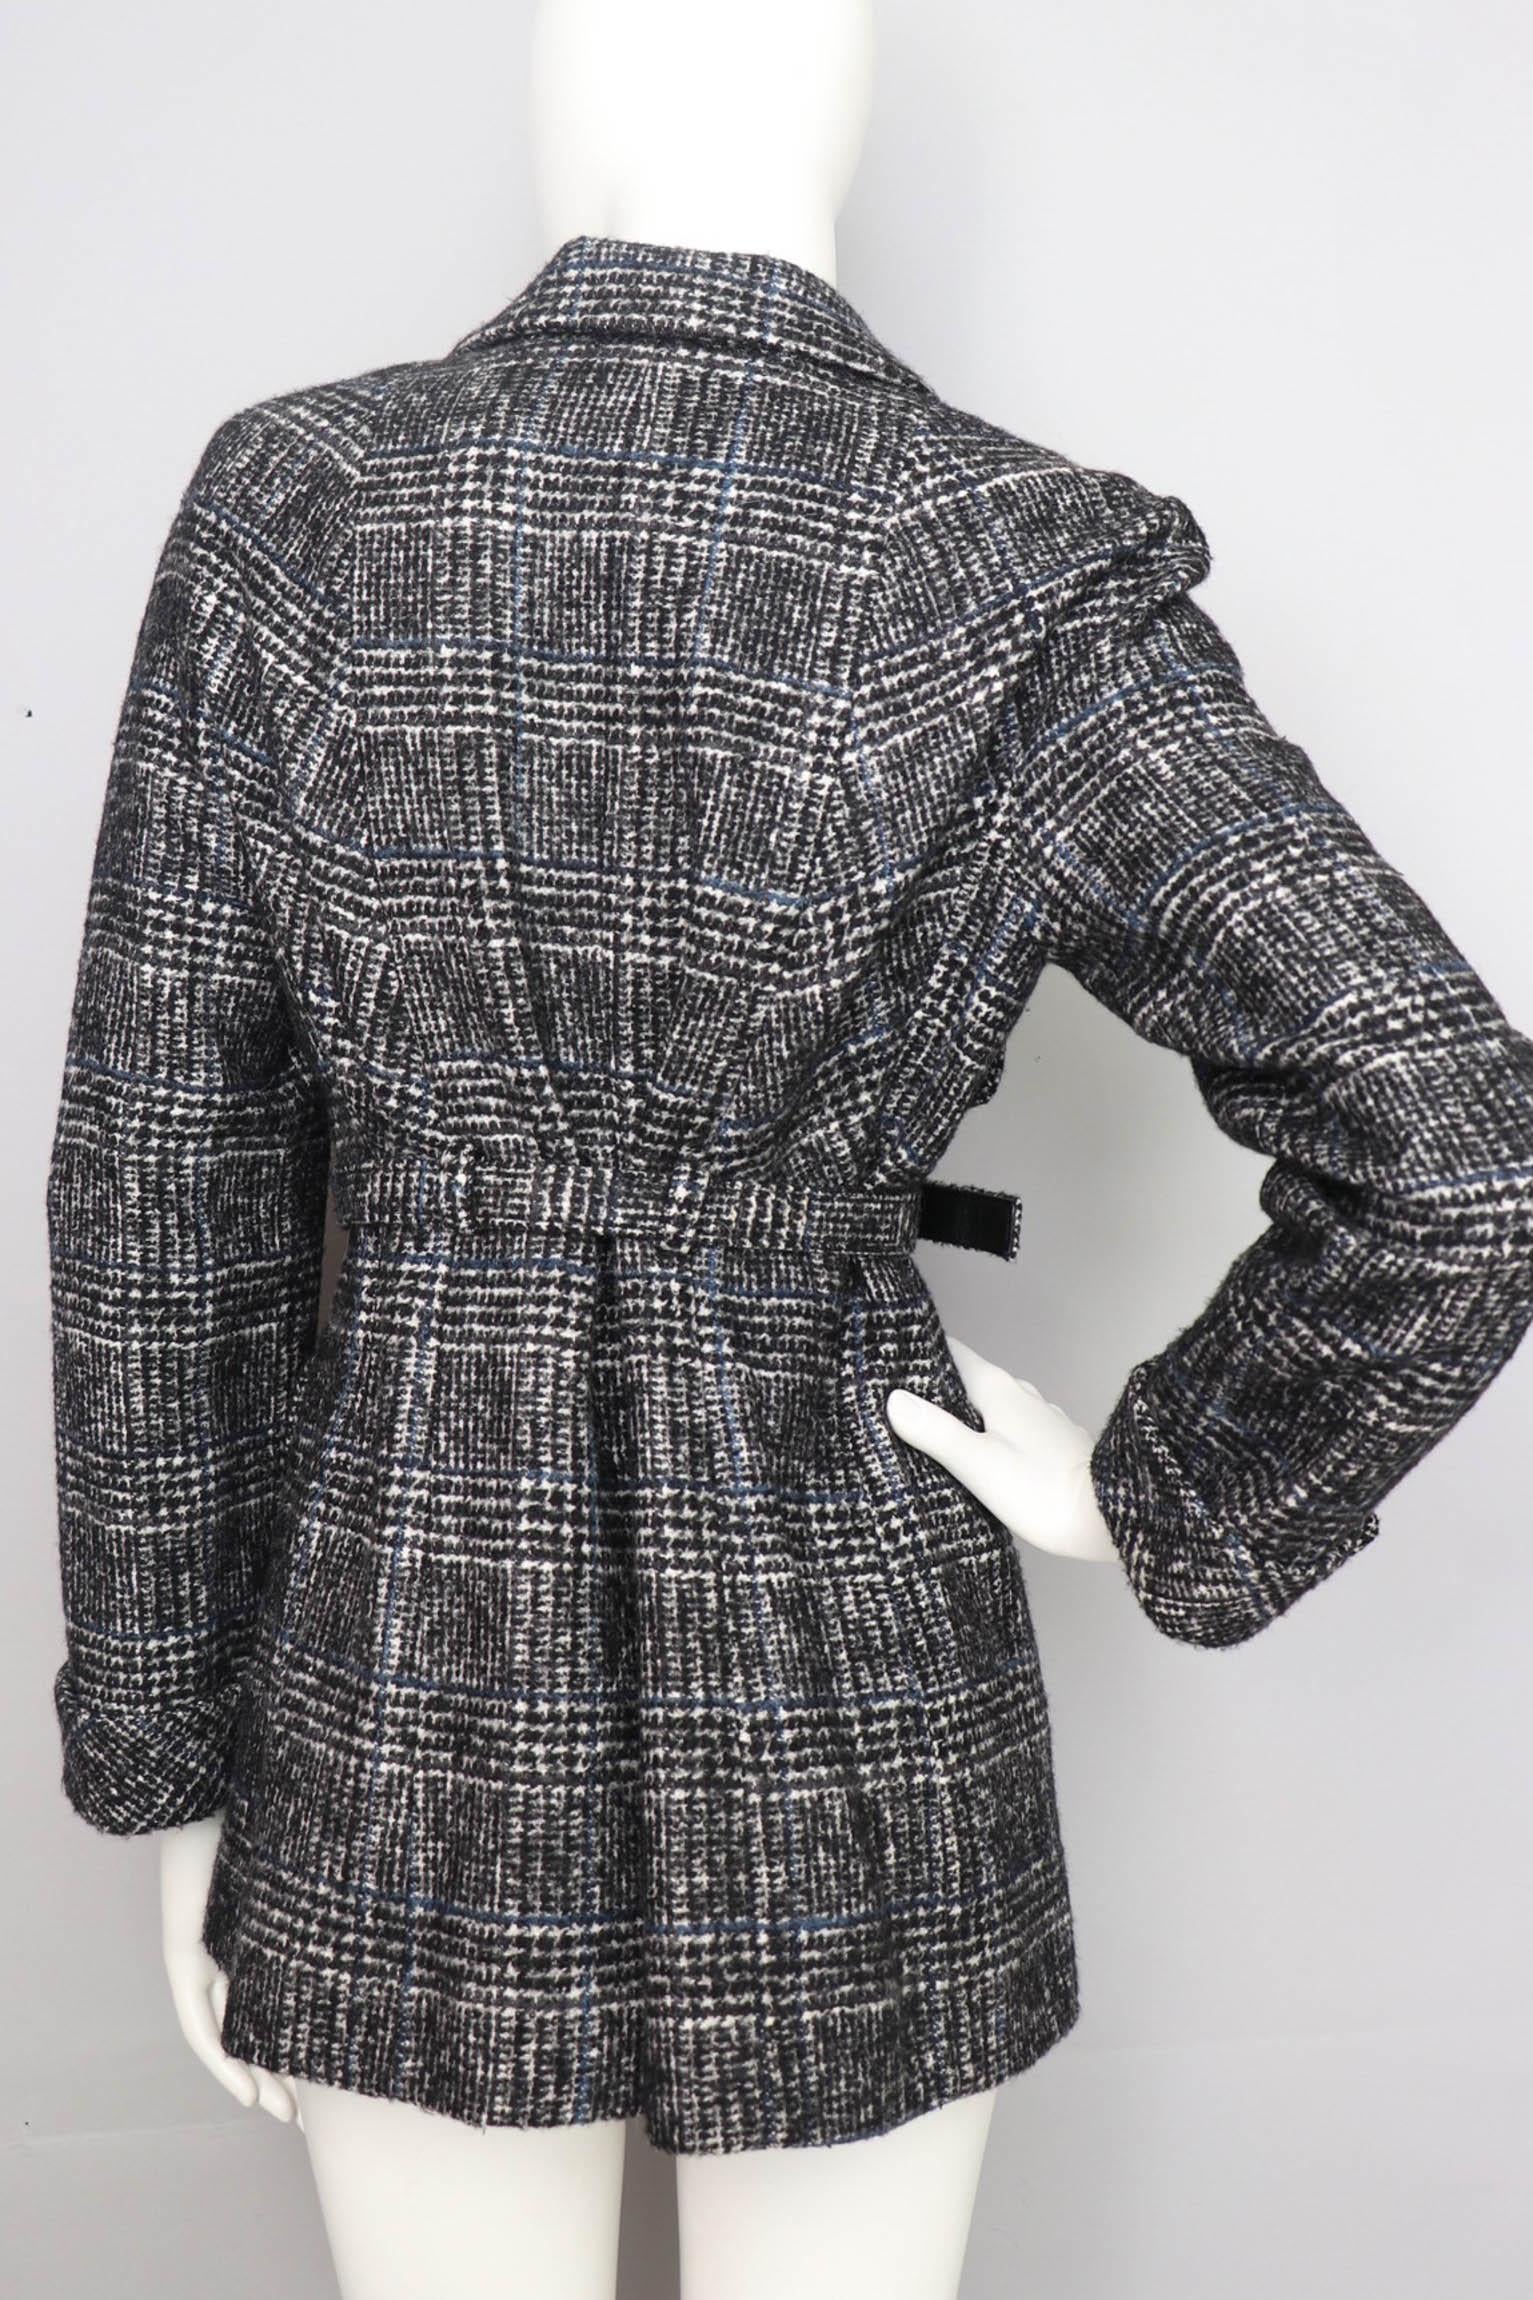 A classic 1990s tartan Chanel wool jacket with a deep v-front and a button-down front. The jacket has a matching waist belt with a silver Chanel engraved buckle and two patch pockets situated on both sides, one on each breast and one along each